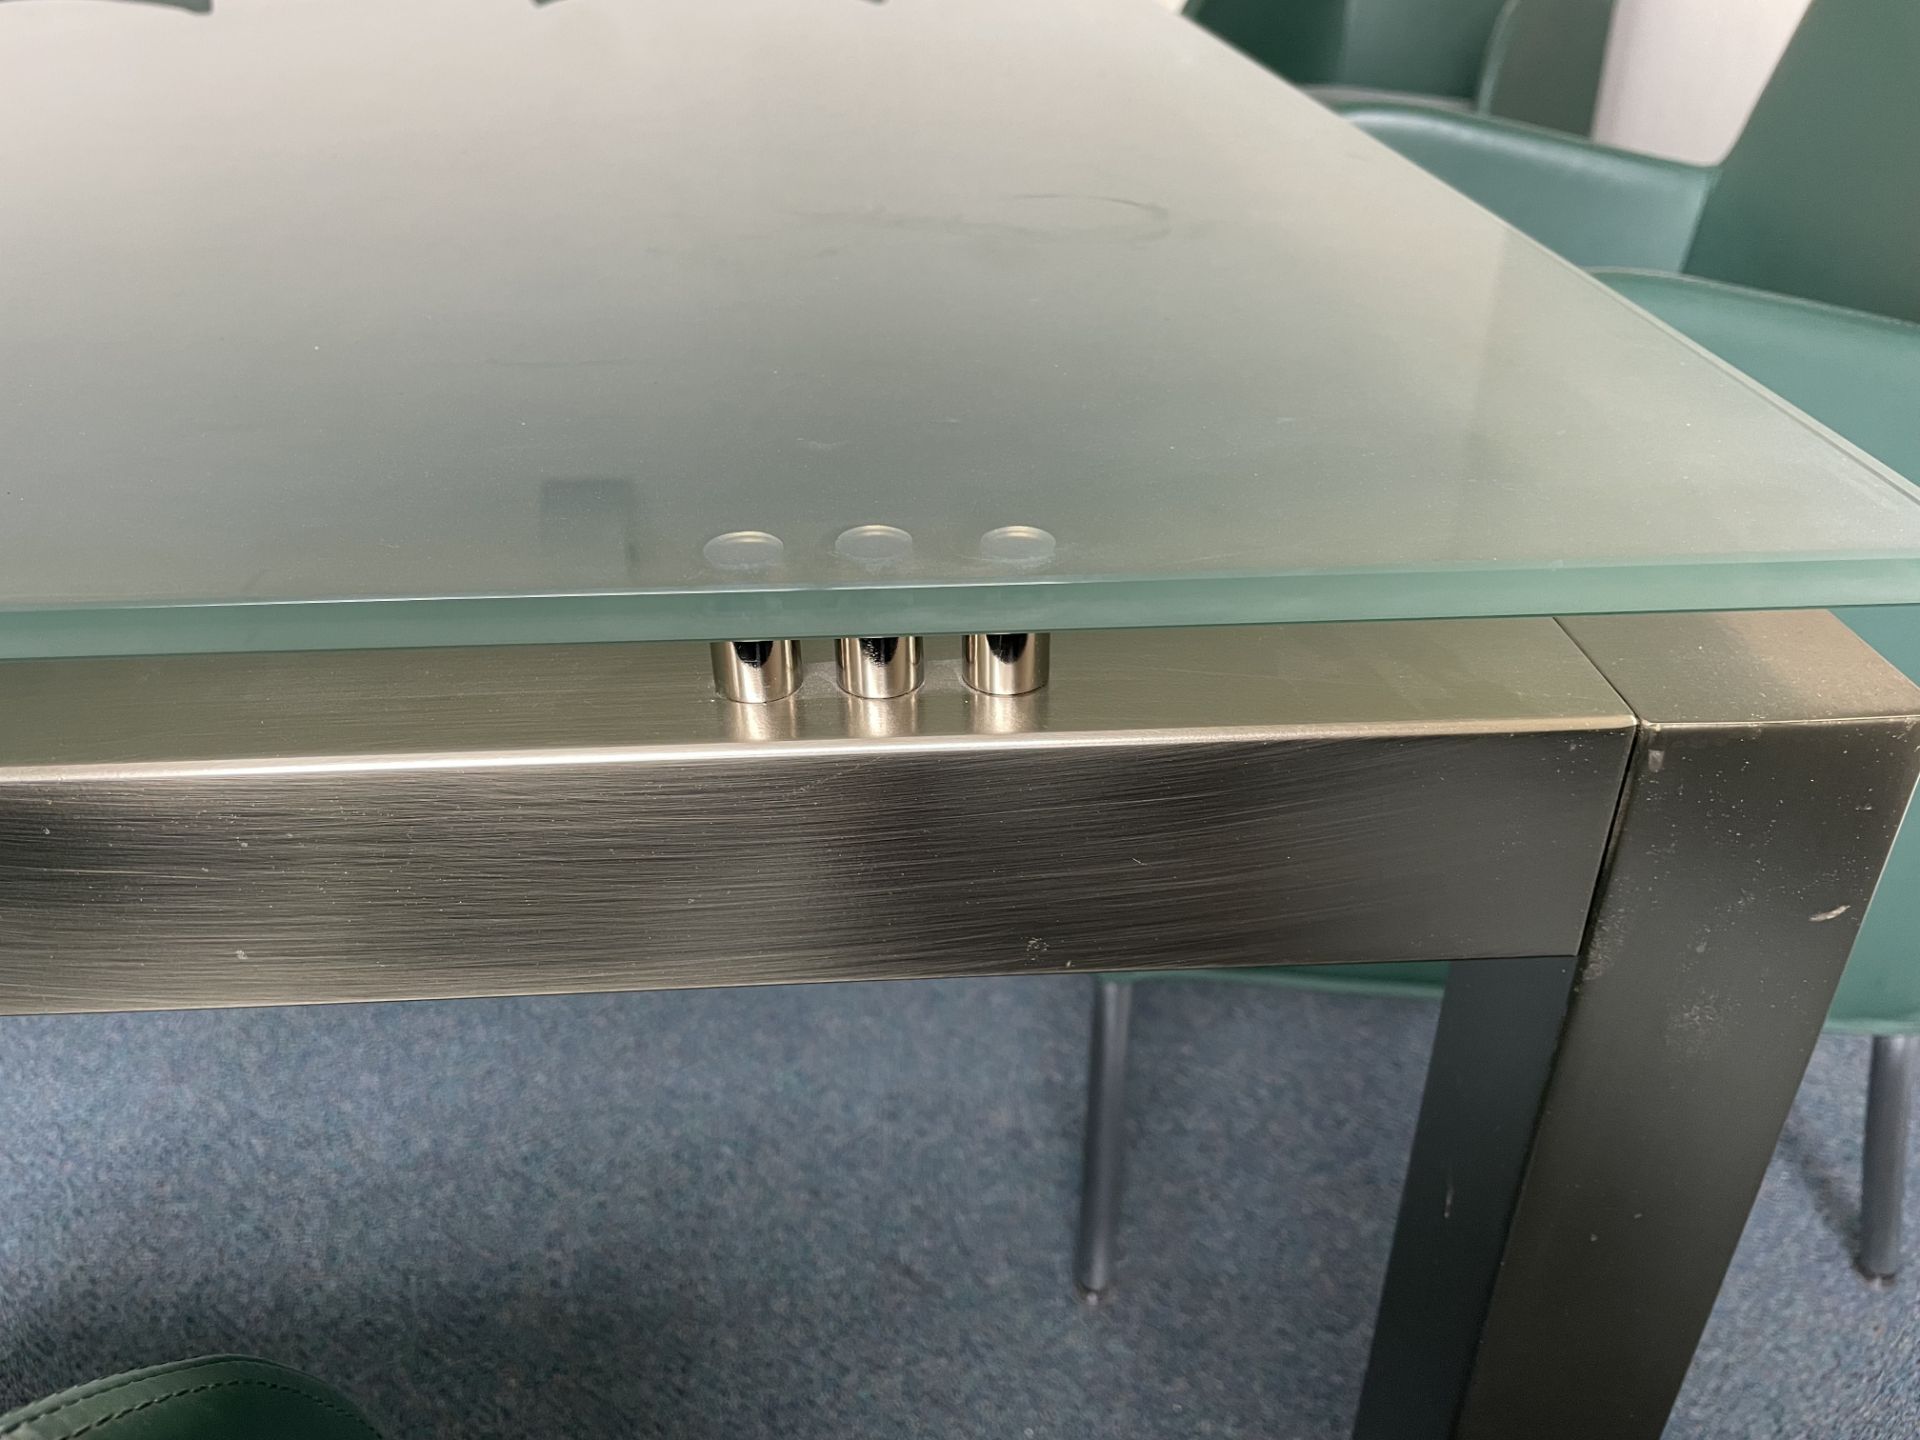 Boardroom table with 10 chairs (without contents) - Image 11 of 14